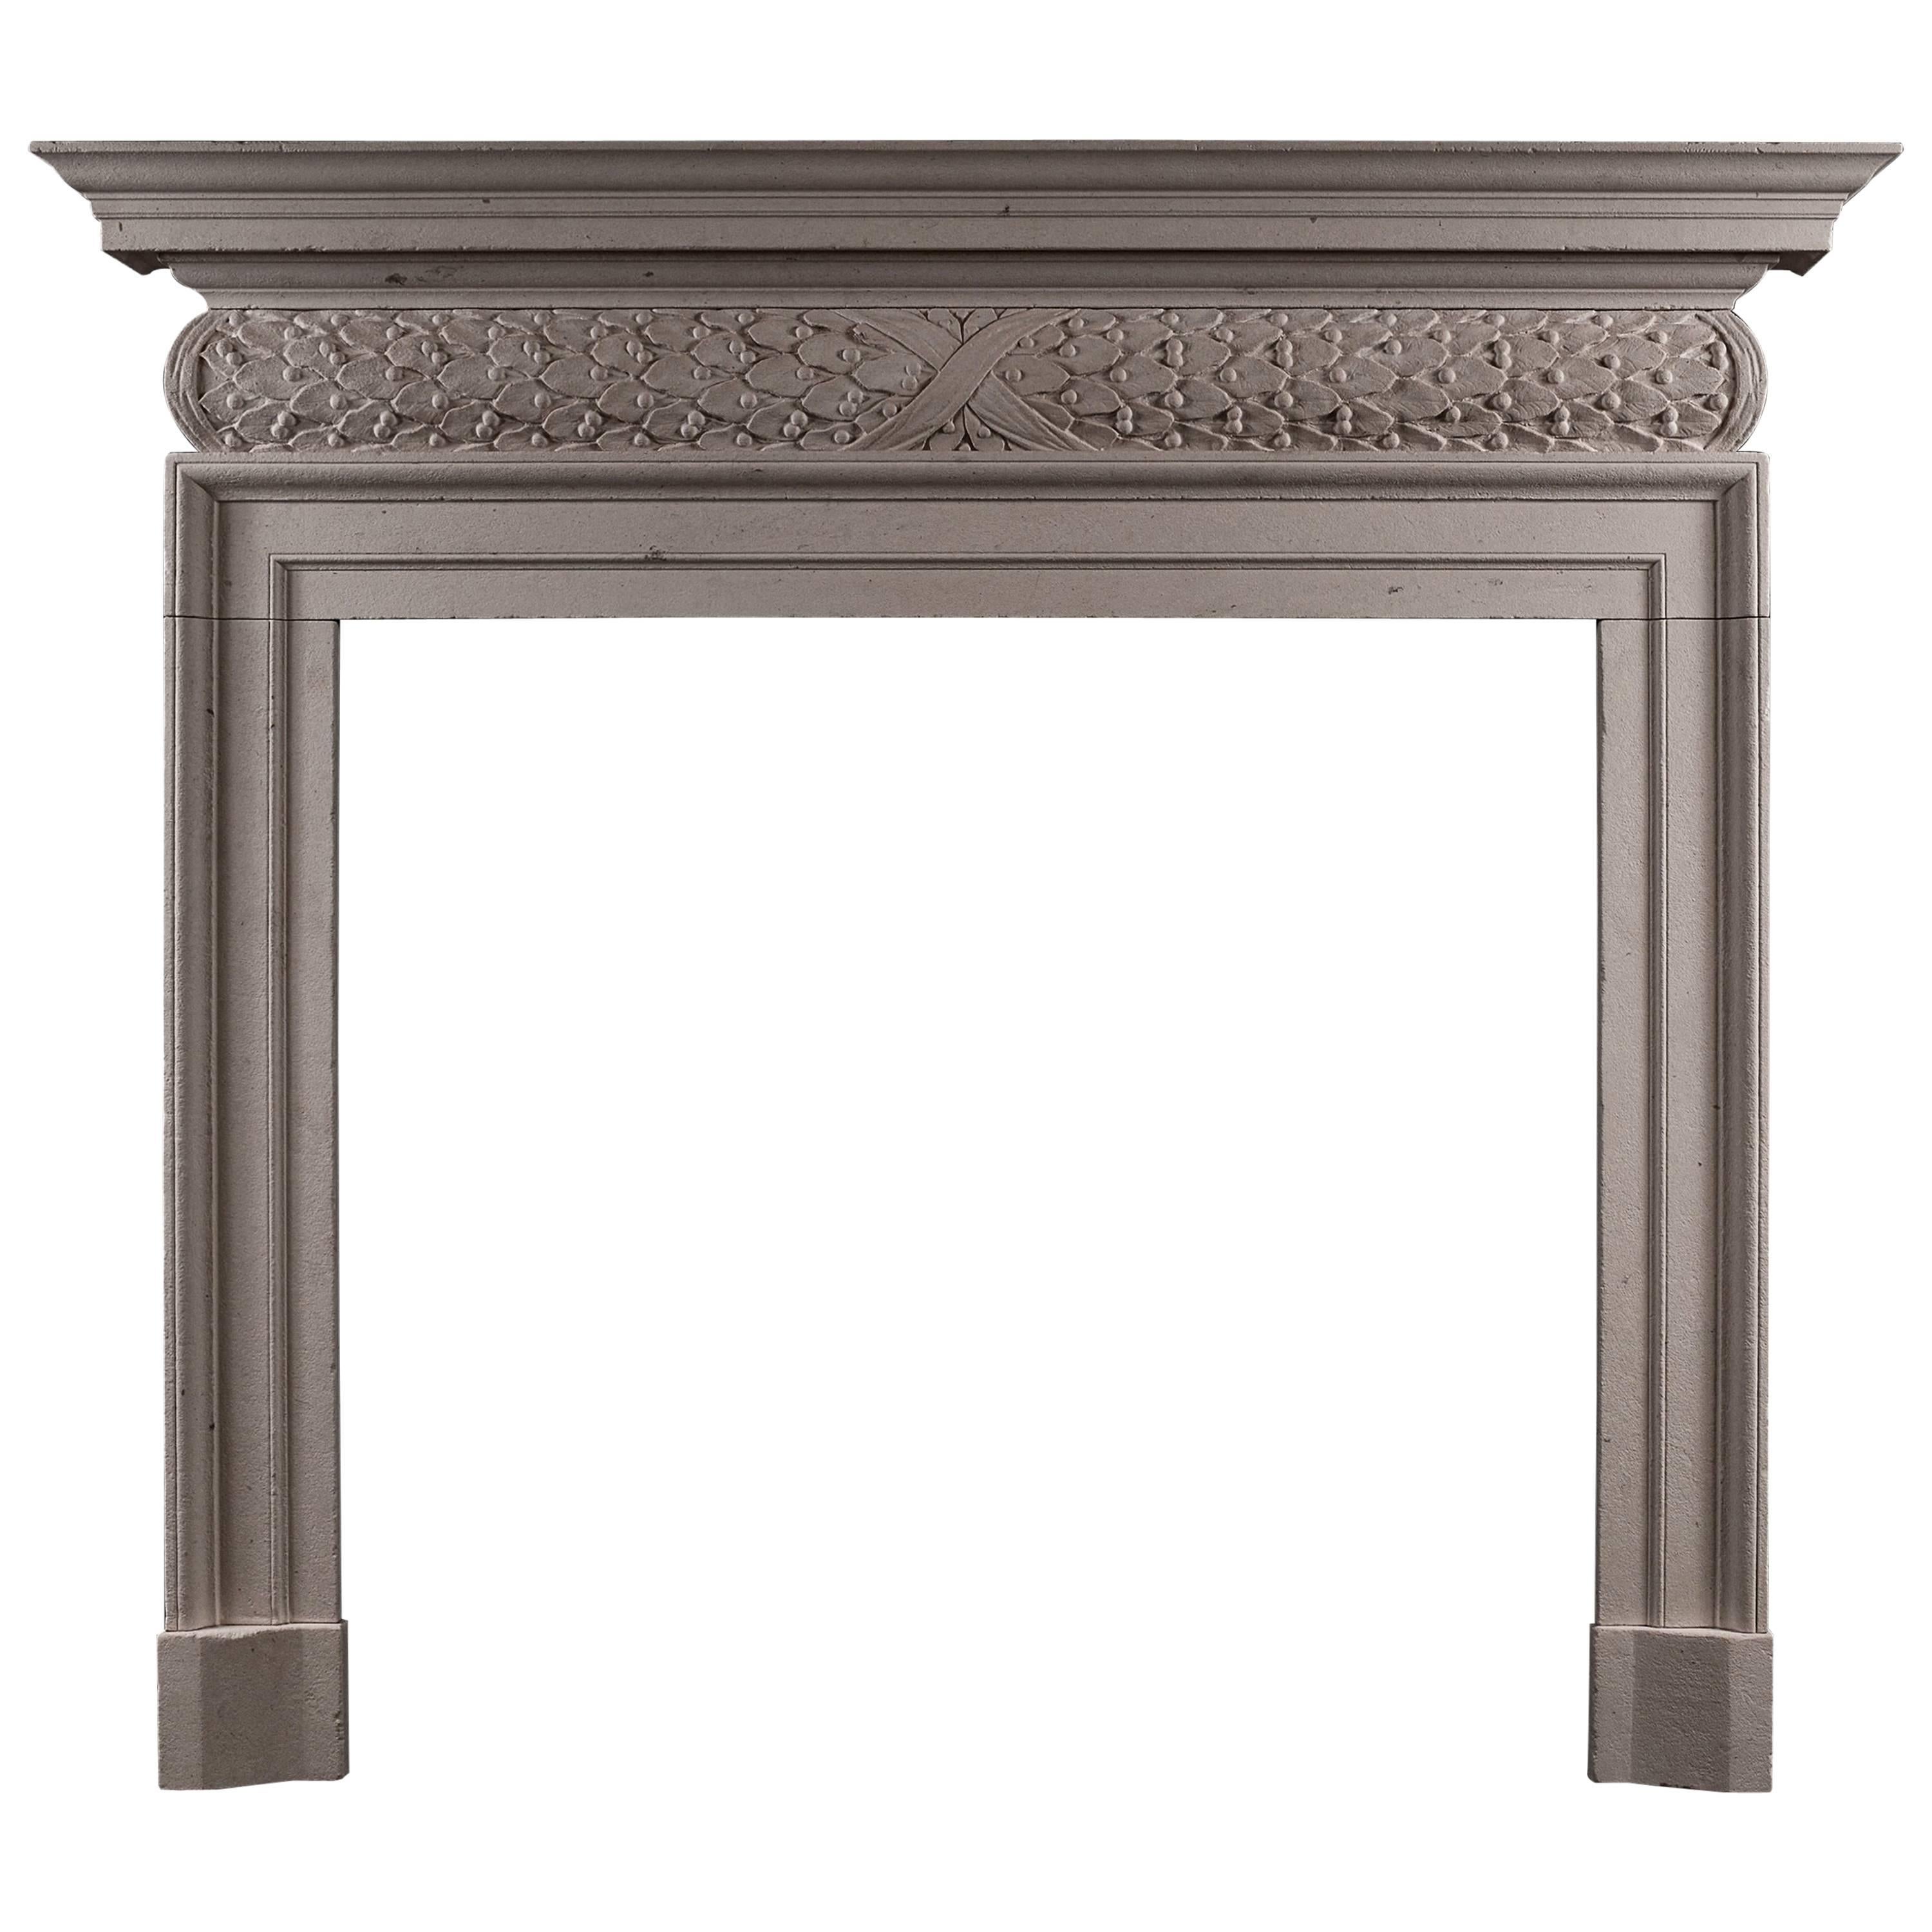 Mid-18th Century Style Antiqued Limestone Fireplace